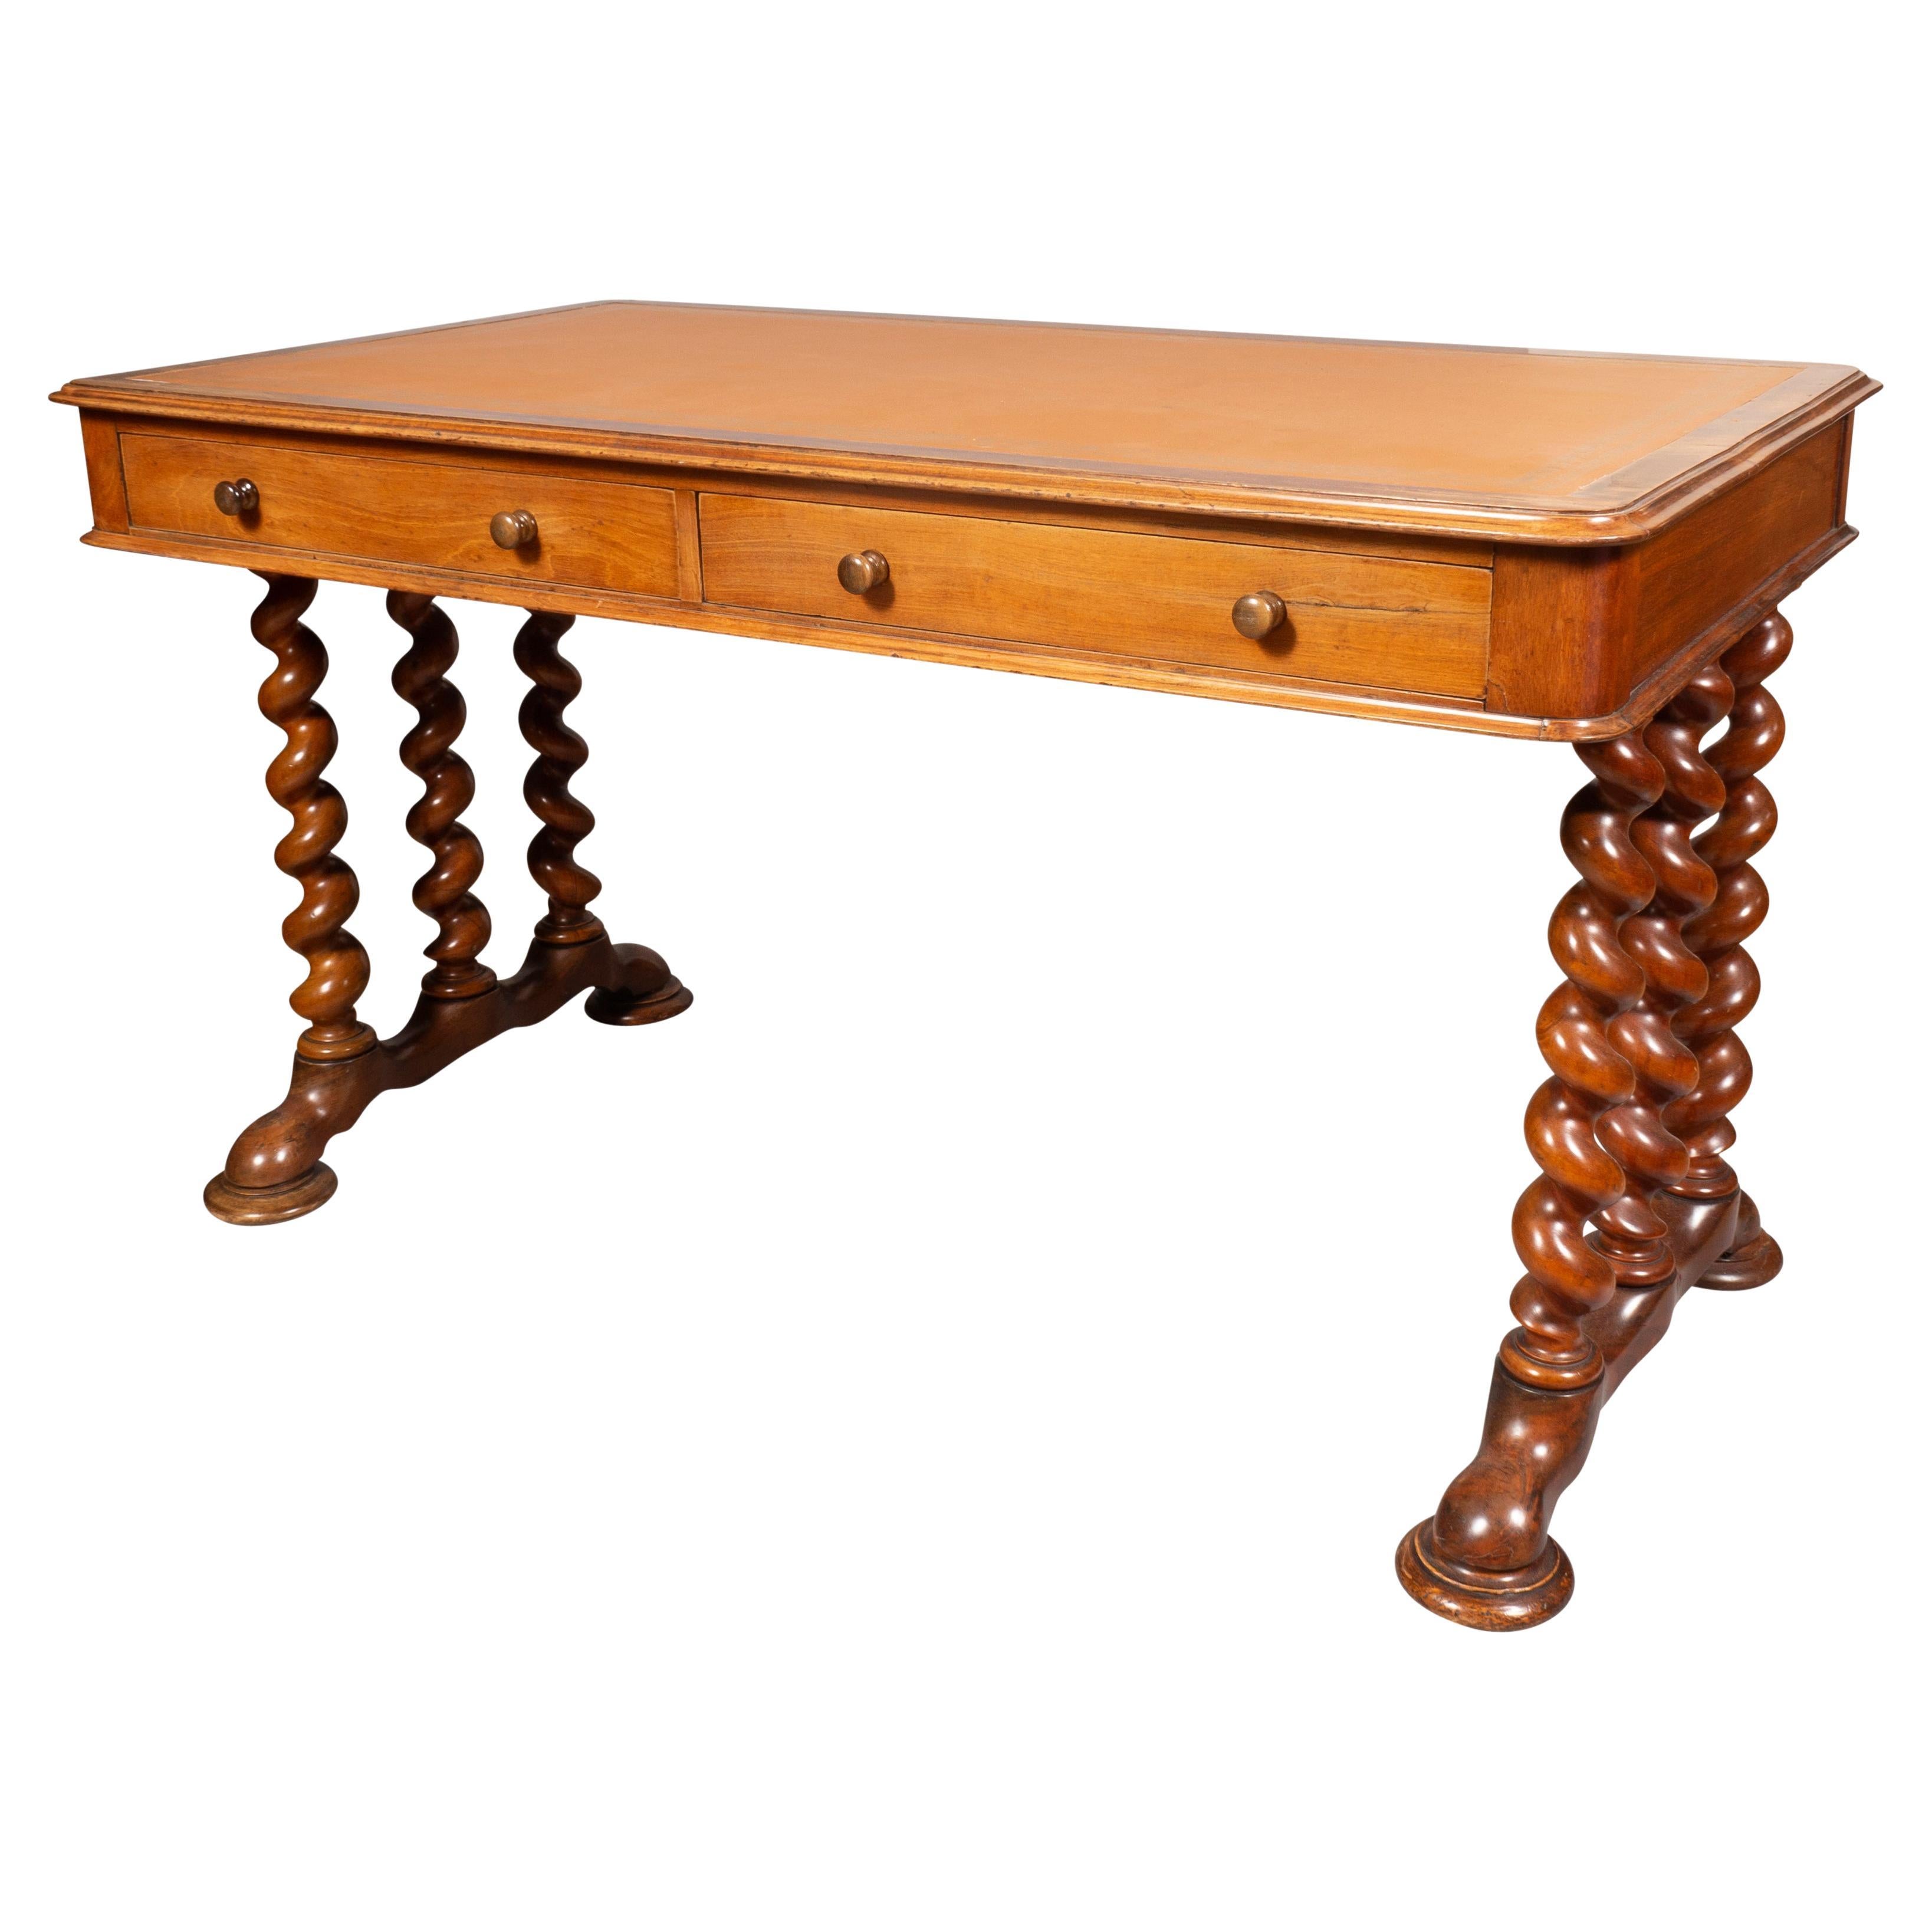 Rectangular top with inset brown leather over two drawers and two opposing false drawers each with wood knobs, raised on a barley twist trestle base. Disc feet with casters.